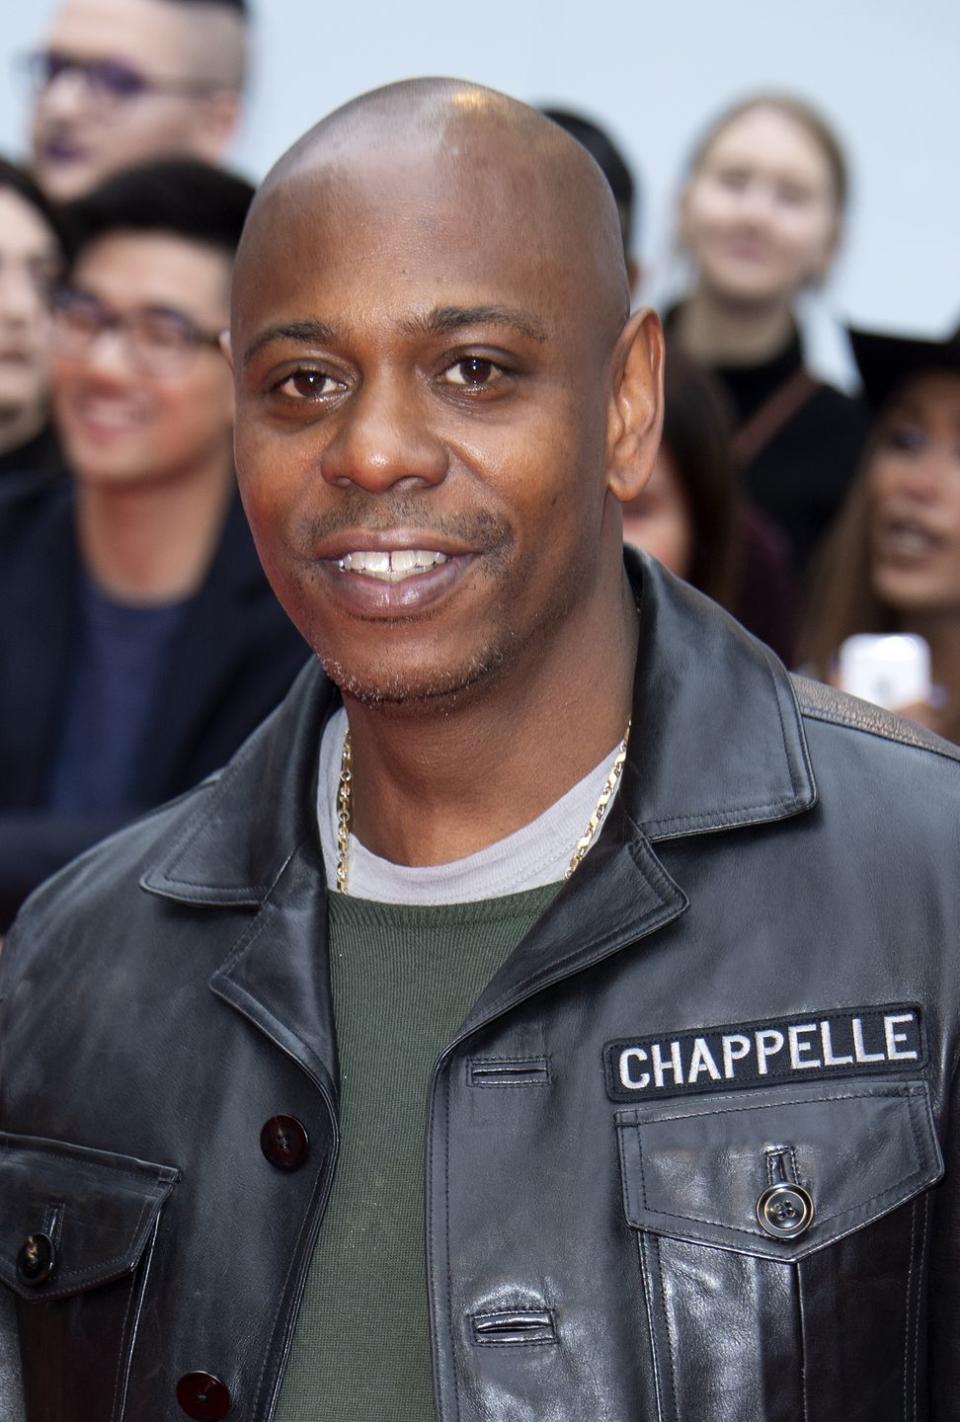 4) Dave Chappelle